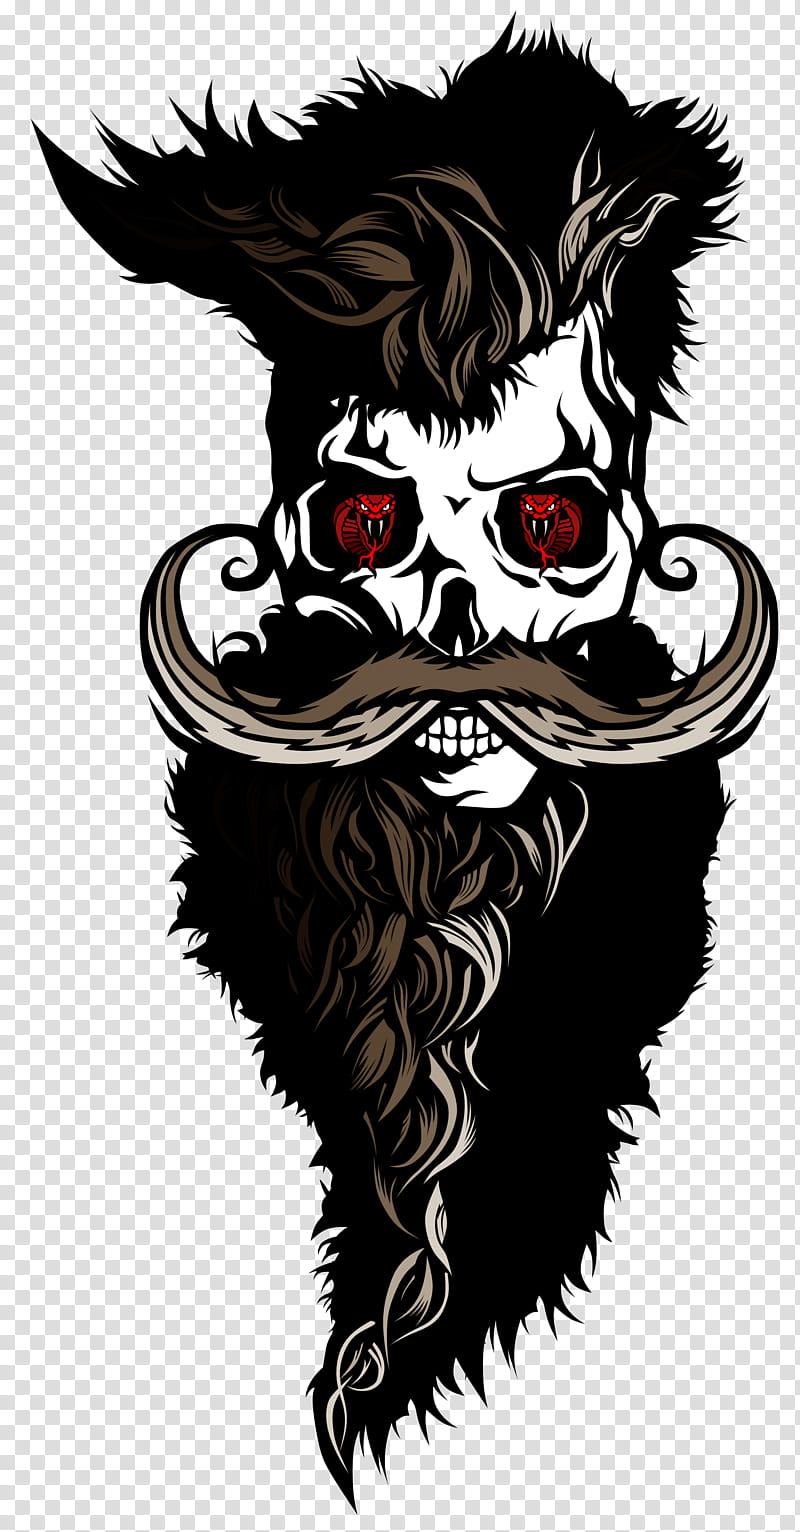 Illustrated hipster moustache beard #AD , #SPONSORED, #Affiliate, #hipster,  #moustache, #beard, #Illustrated | Beard illustration, Beard logo design,  Beard vector